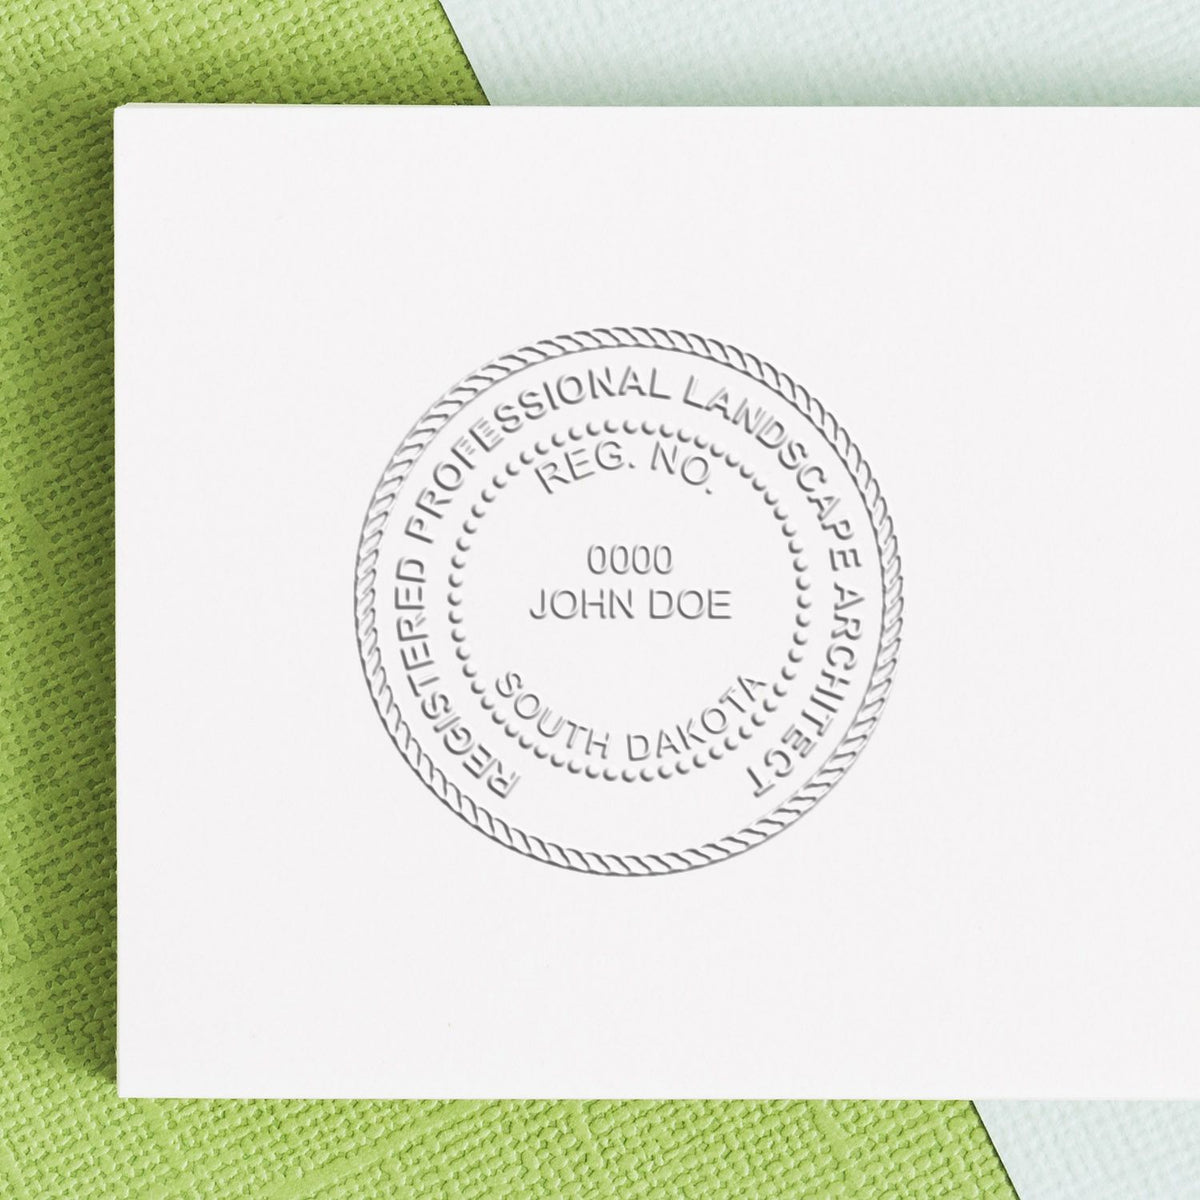 Another Example of a stamped impression of the Hybrid South Dakota Landscape Architect Seal on a office form